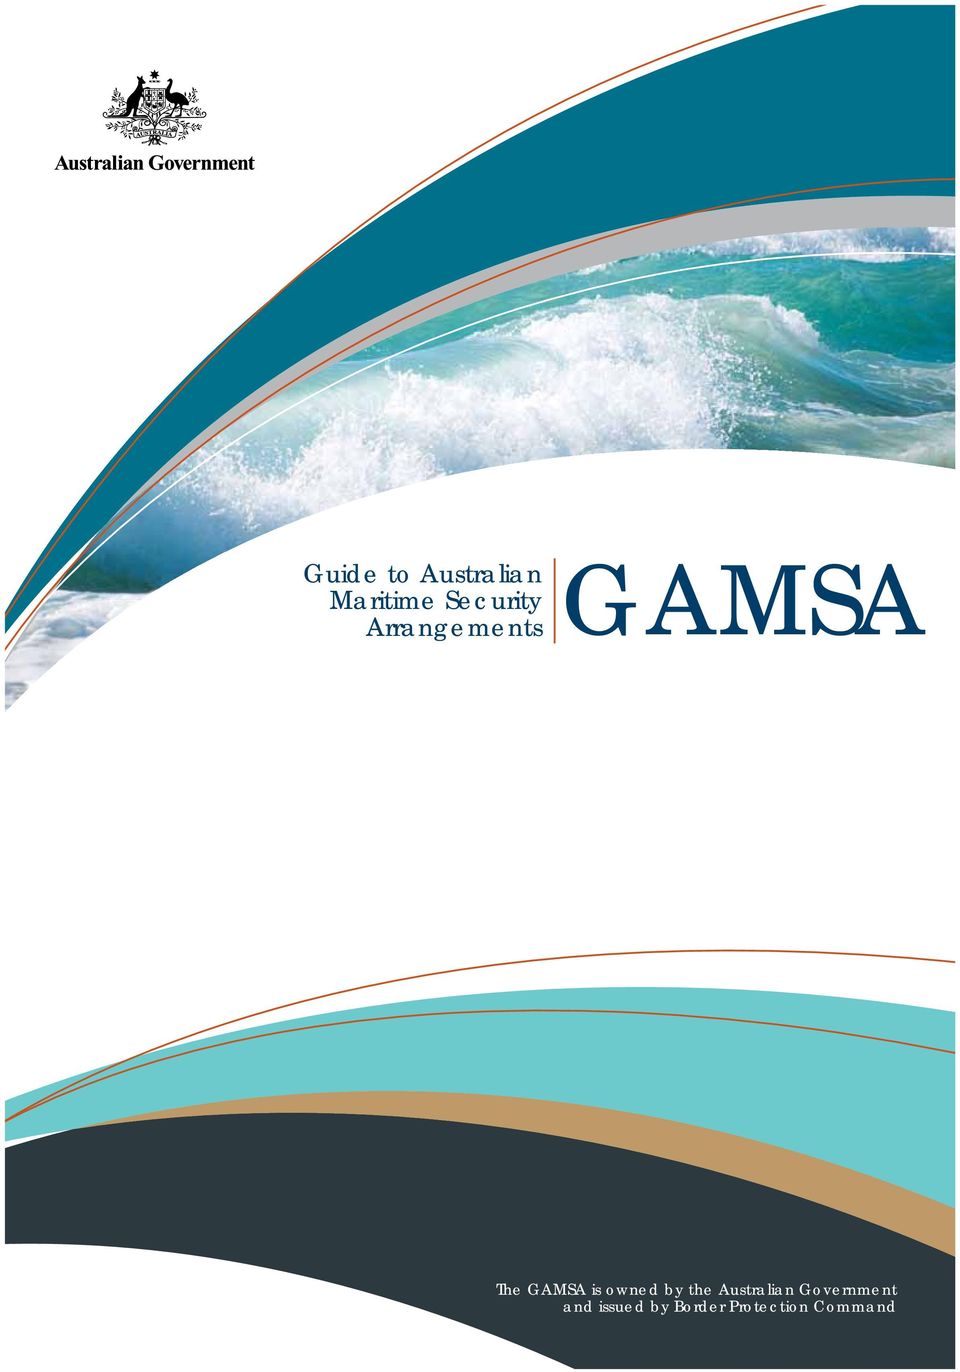 GAMSA is owned by the Australian